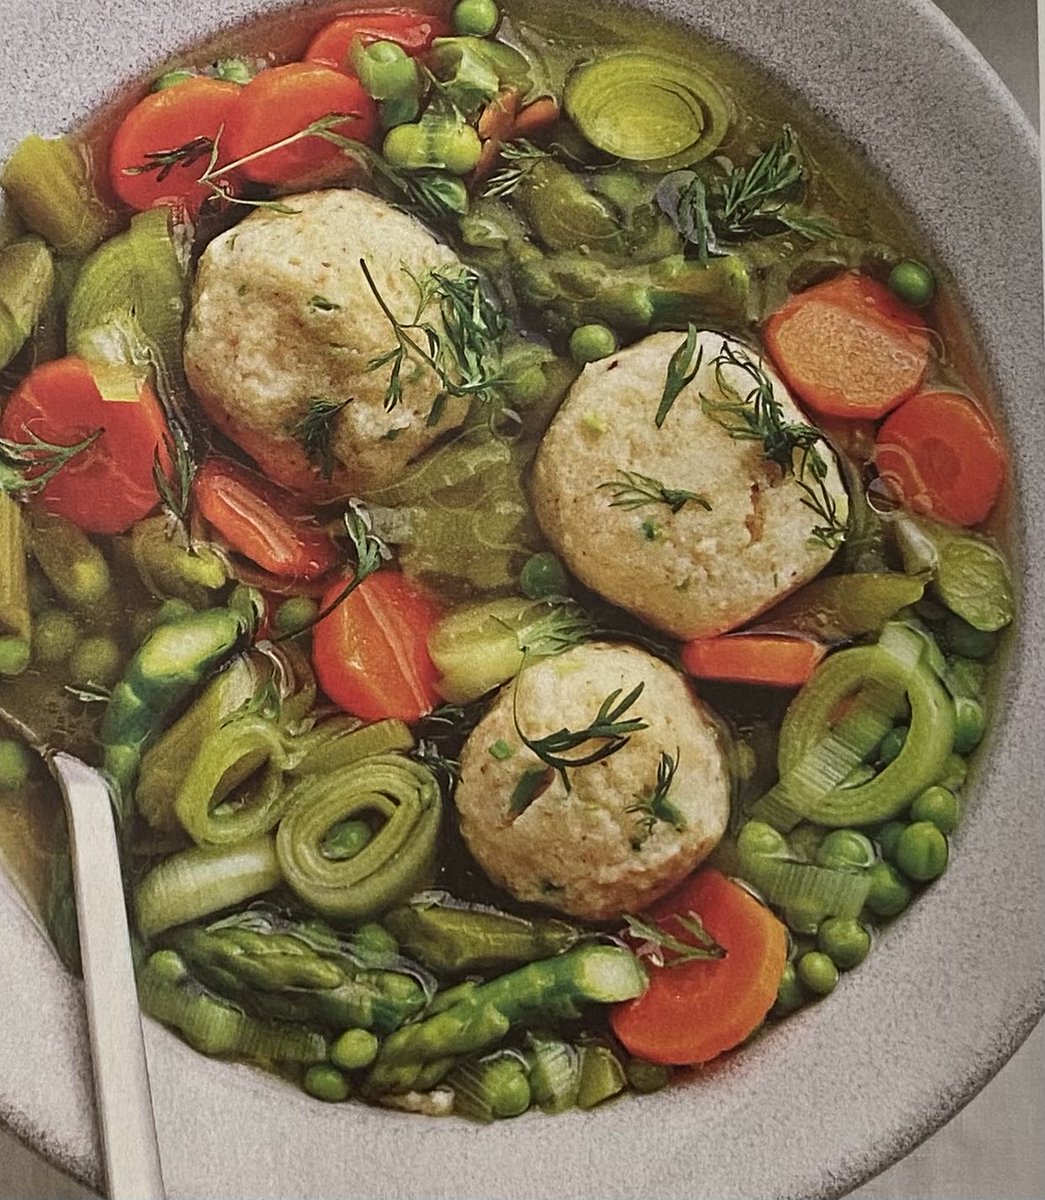 VEGGIE MATZO BALL SOUP 1 leek white➕green part washed ➕sliced 1/2 lb asparagus peeled➕sliced 8 cloves 🧄peeled➕smashed 10 oz frozen green🫛 1/4 c fresh dill chopped 🧂➕Black🌶️ To Taste To a 🥣 ➕🥚 seltzer oil 🧂black 🌶️chives➕whisk Stir in matzo meal Refrigerate 1 hour